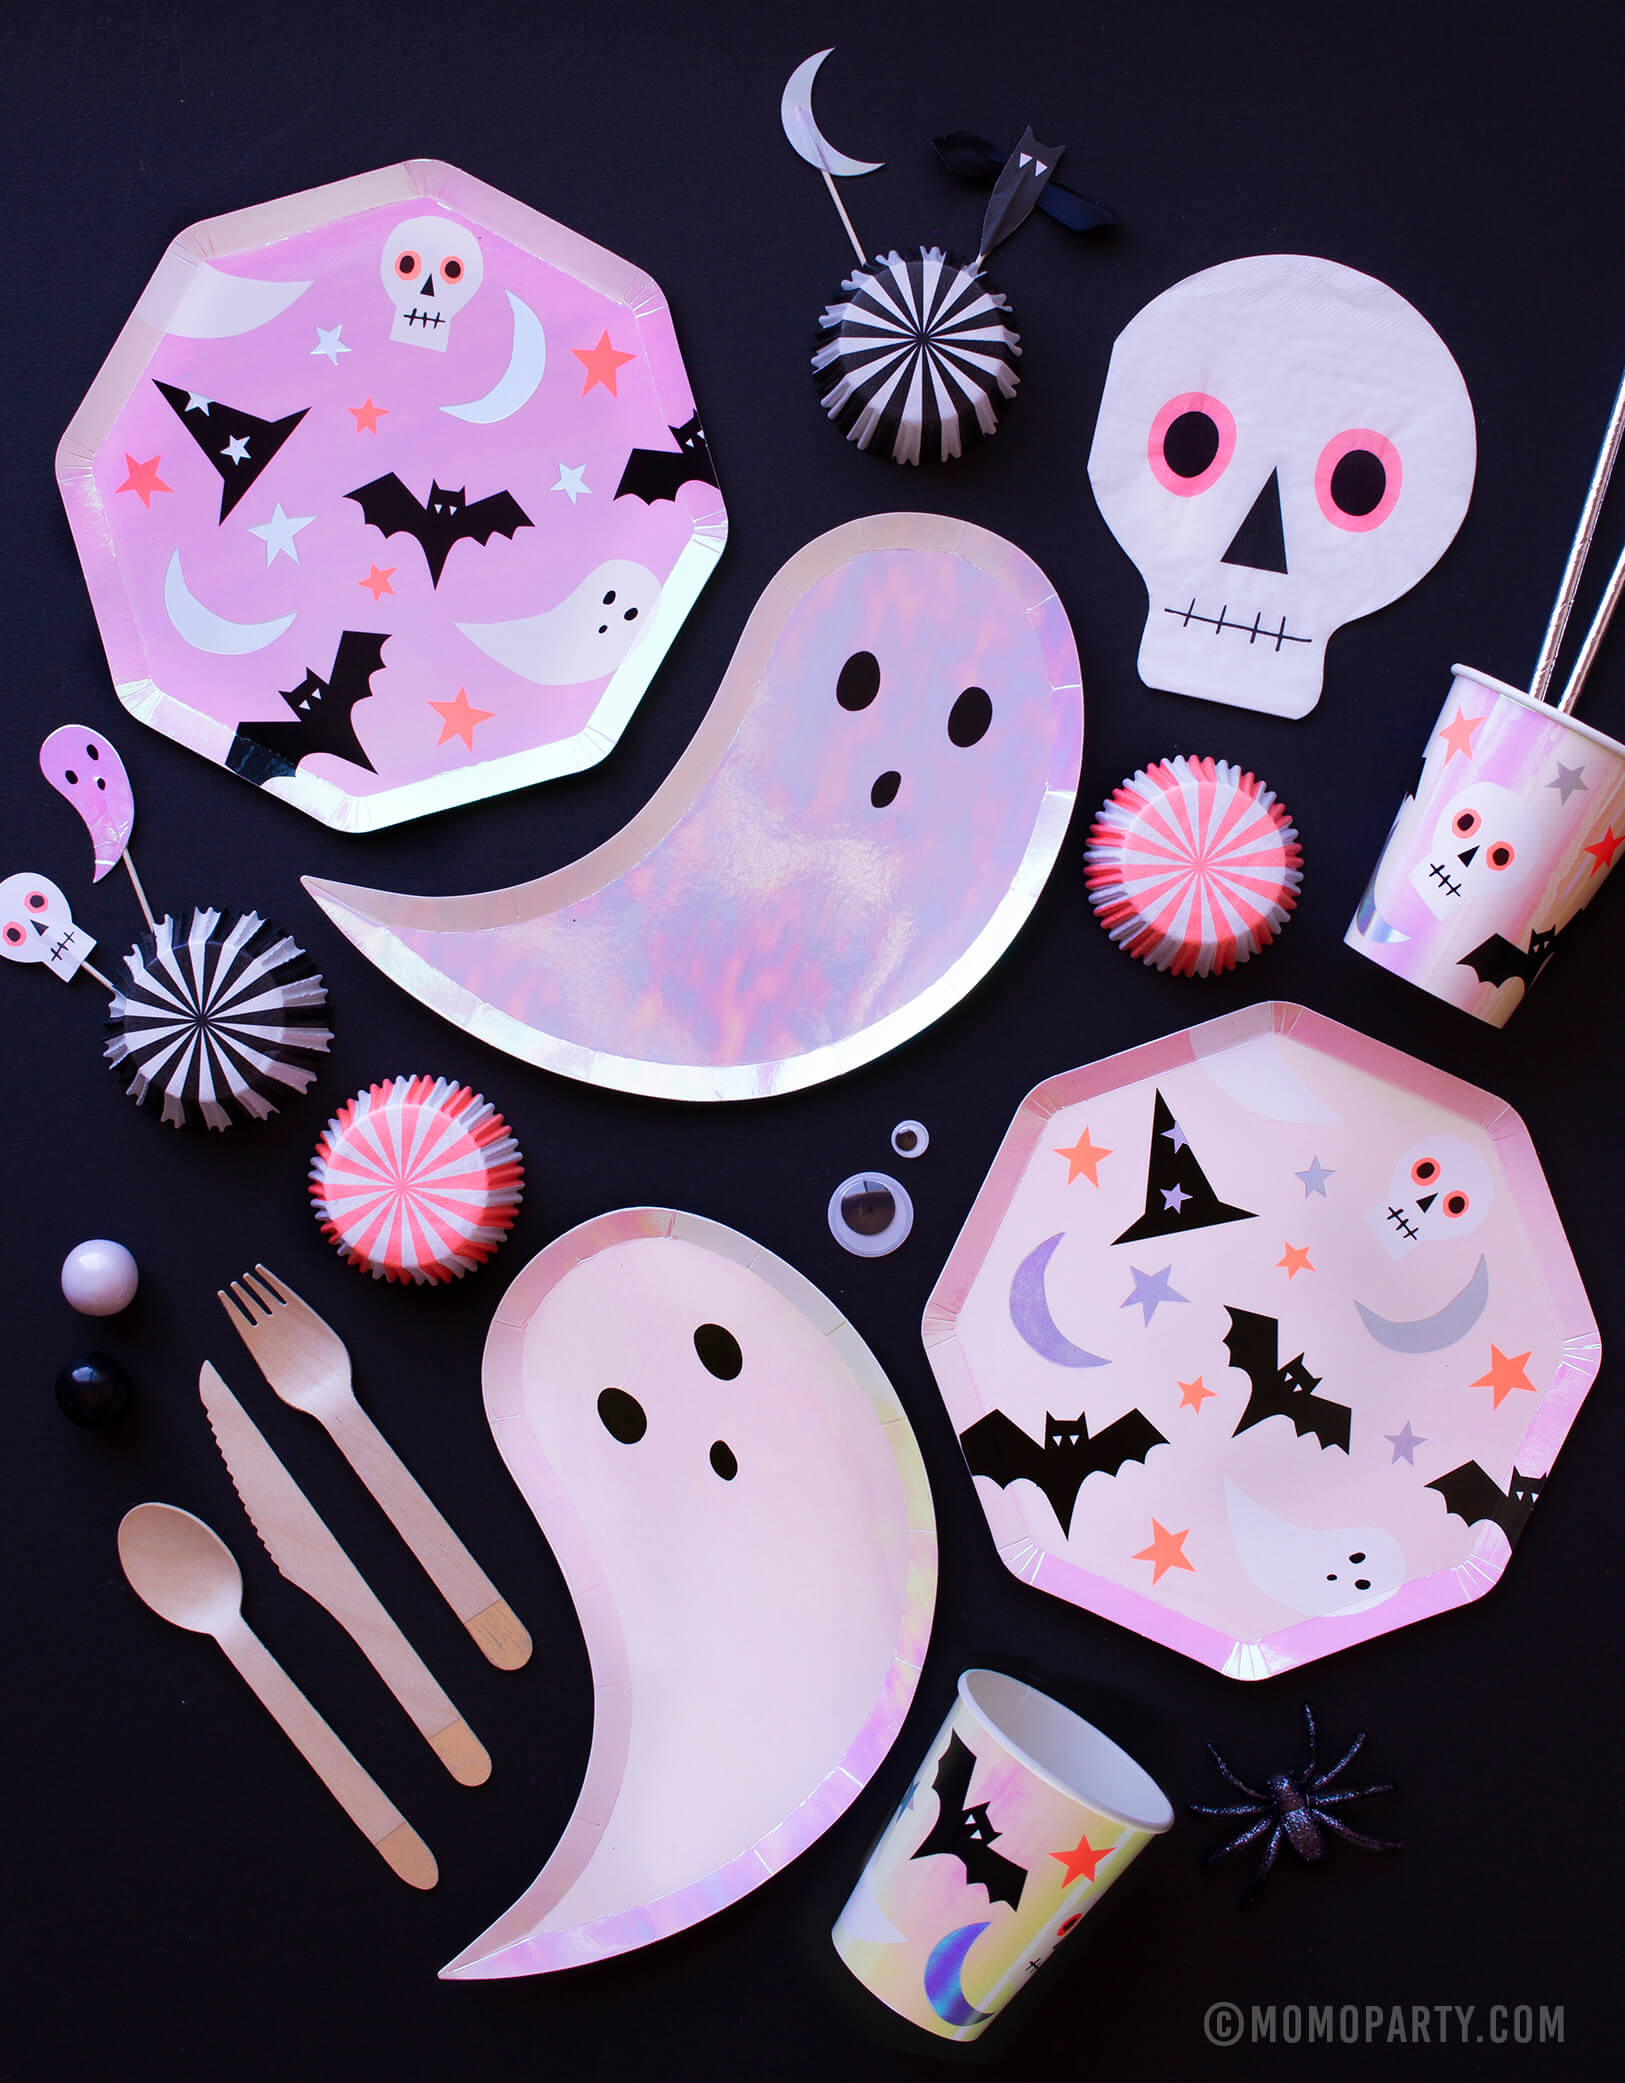 2019 momo party kids New Halloween party collection box supplies with Meri Meri ghost plates, halloween icon plates and cups, skull napkin, cupcake kits